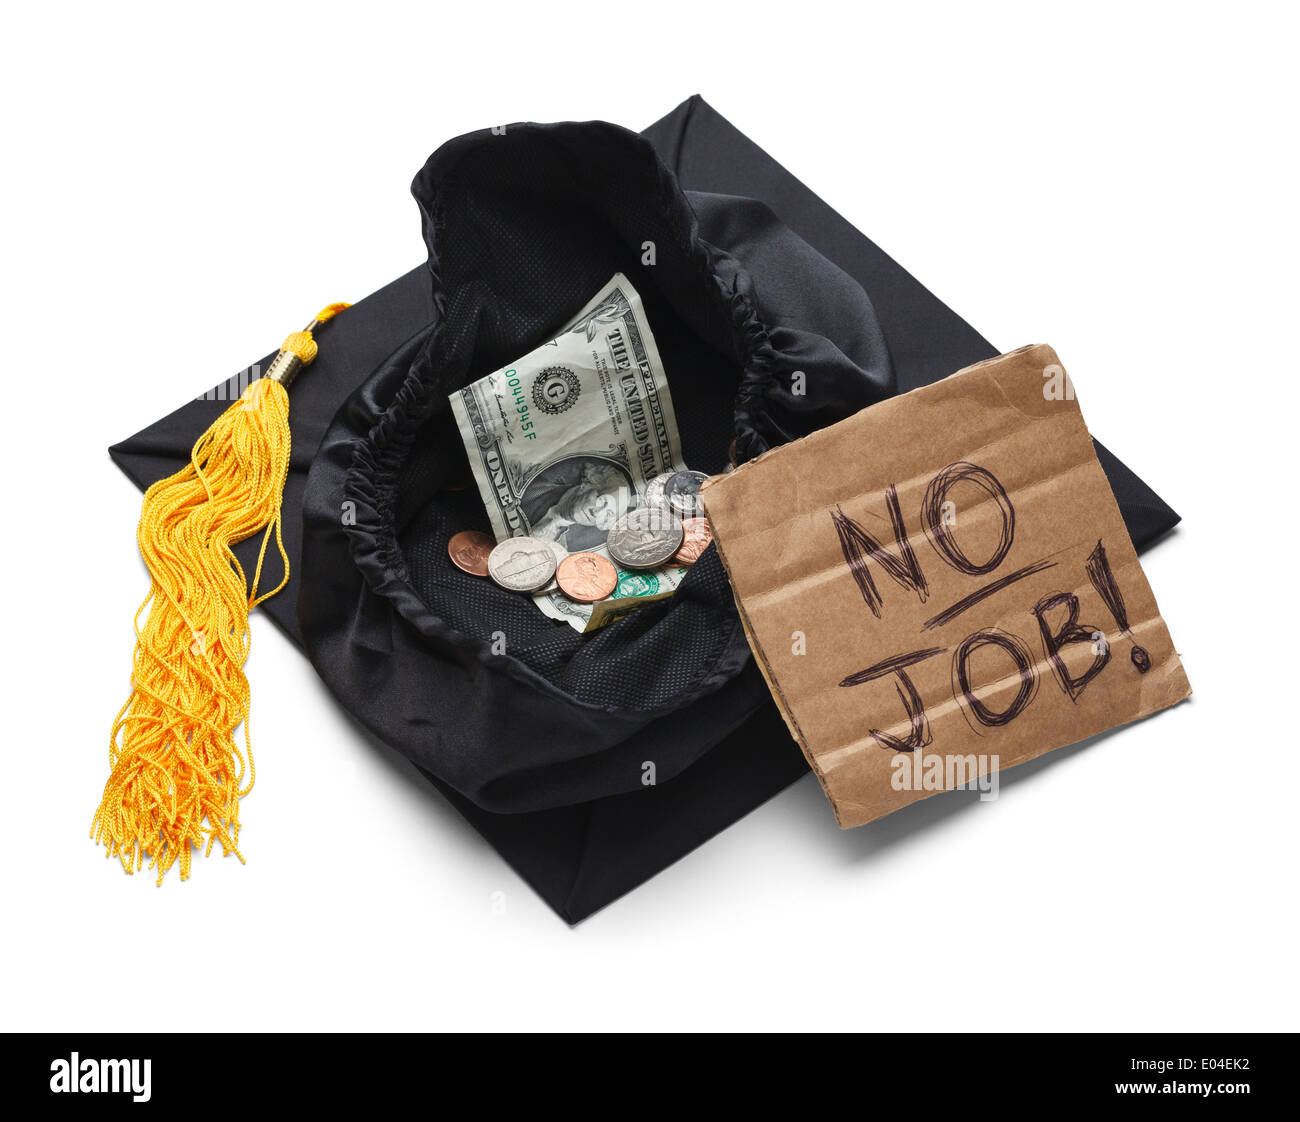 Graduation Cap with Change Money and No Job Sign Isolated on White Background. Stock Photo